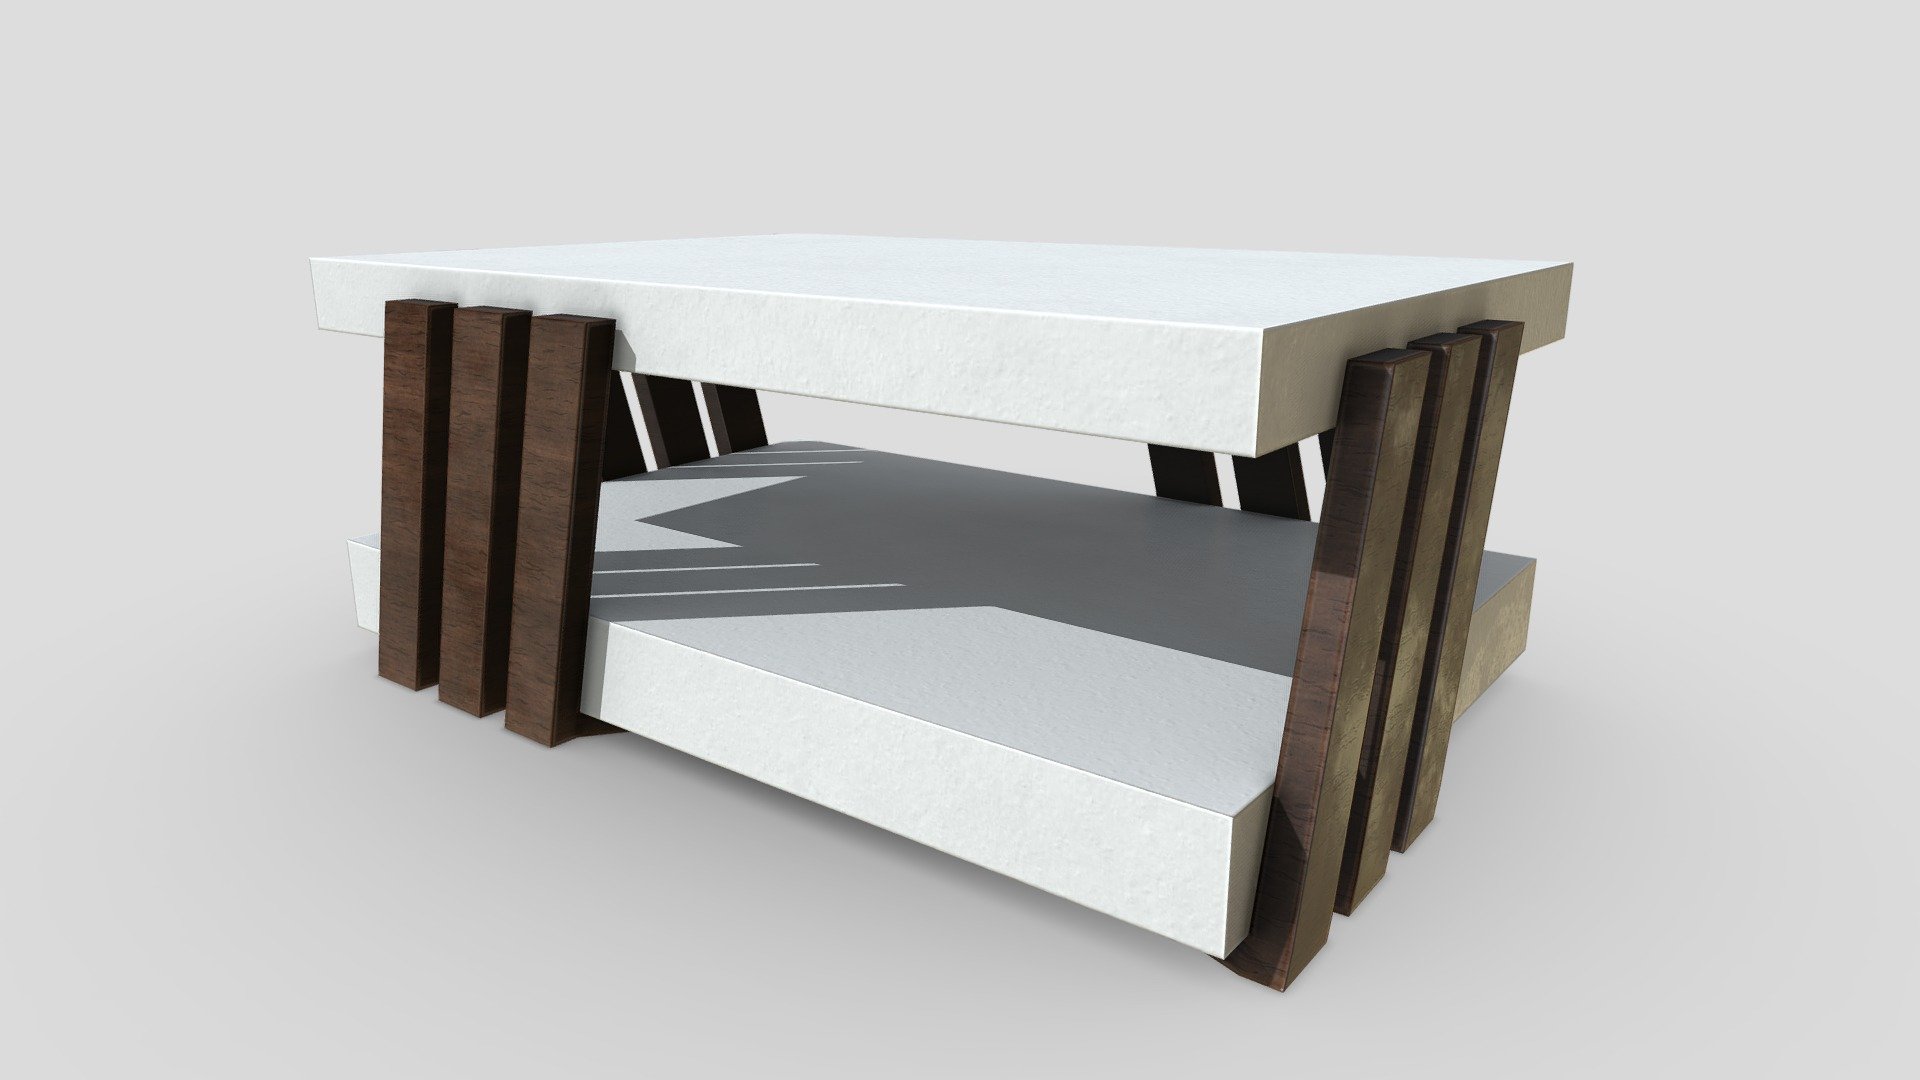 Modern coffee table

Low-poly

High-resolution PBR textures, UV unwrapped.

Available file format:


.fbx

Textures list:


Base_color.png (4096x4096)
Mixed_AO.png (4096x4096)
Normal_DirectX.png (4096x4096)
Roughness.png (4096x4096)

Geometry:


polygon:  234
verticles:  232

Model positioned in the center of the coordinates system 3d model